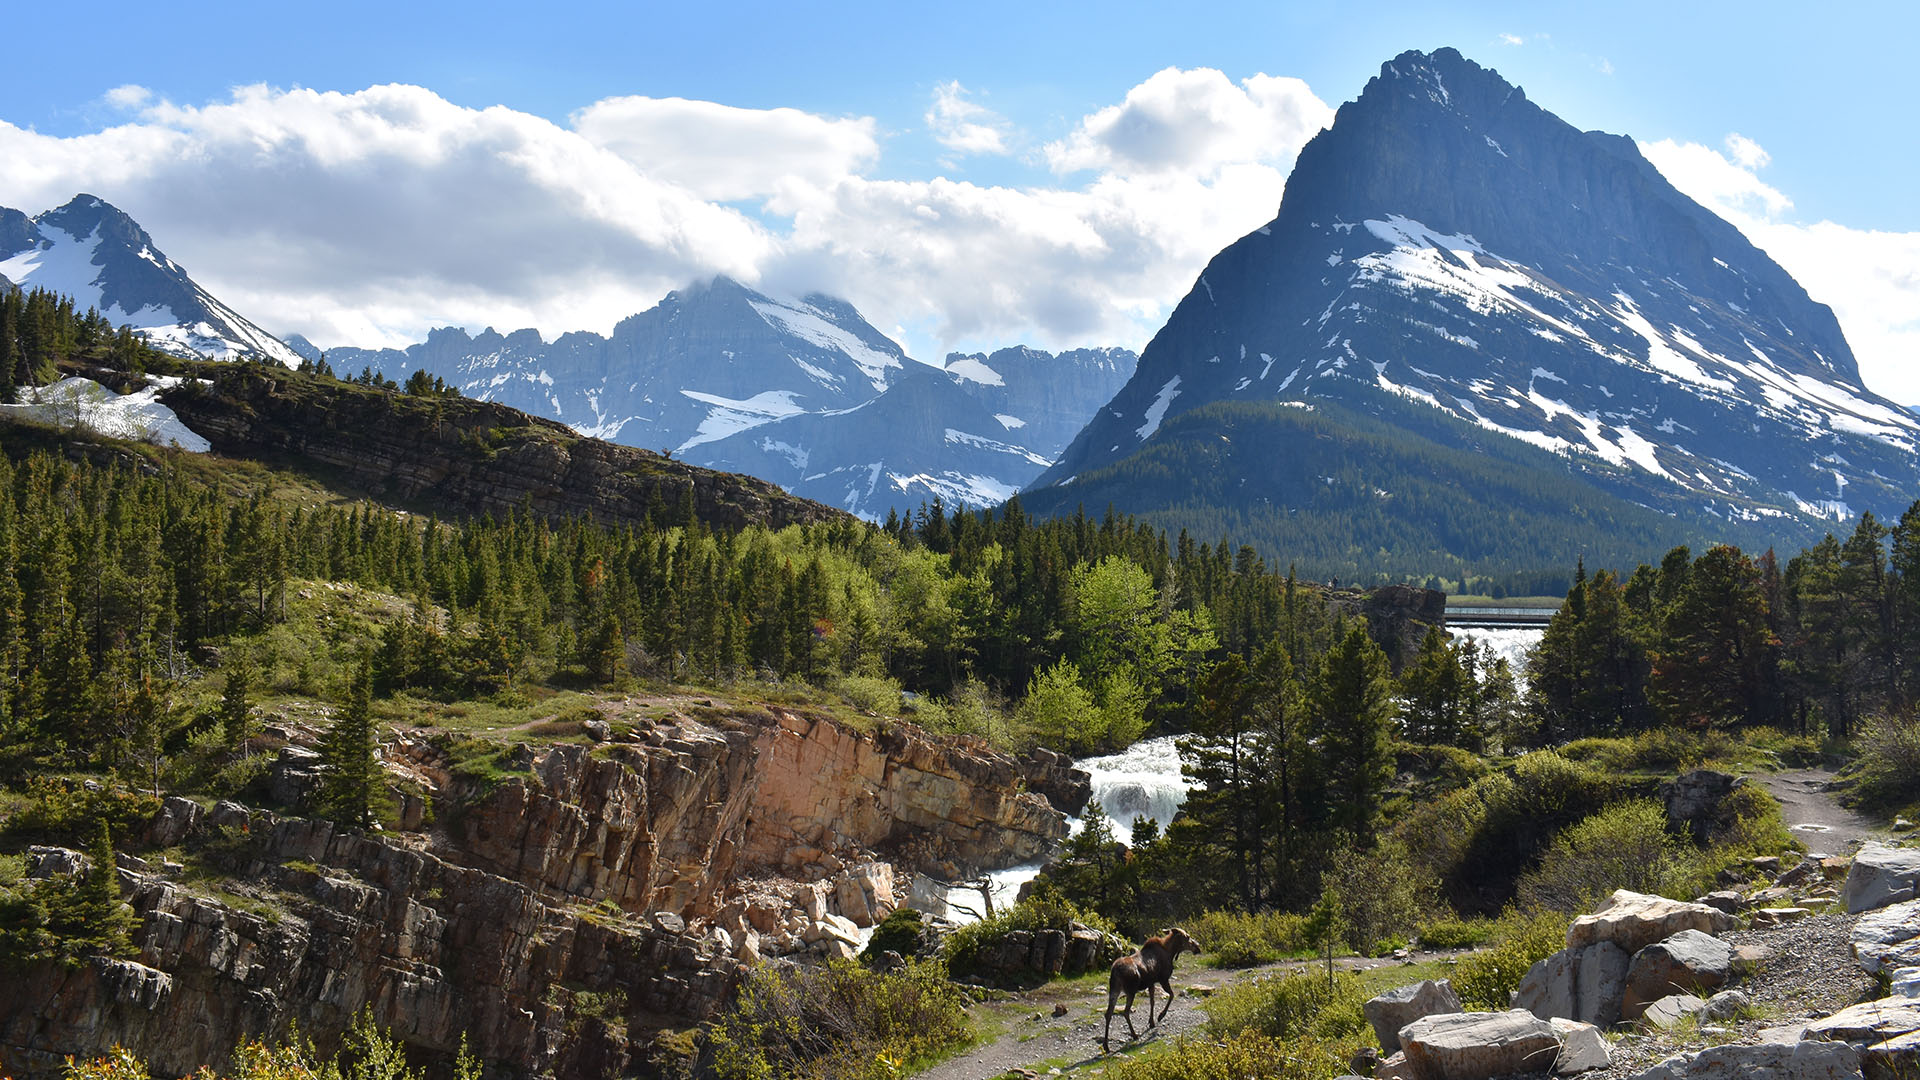 A moose wanders along a mountain path in Glacier National Park.